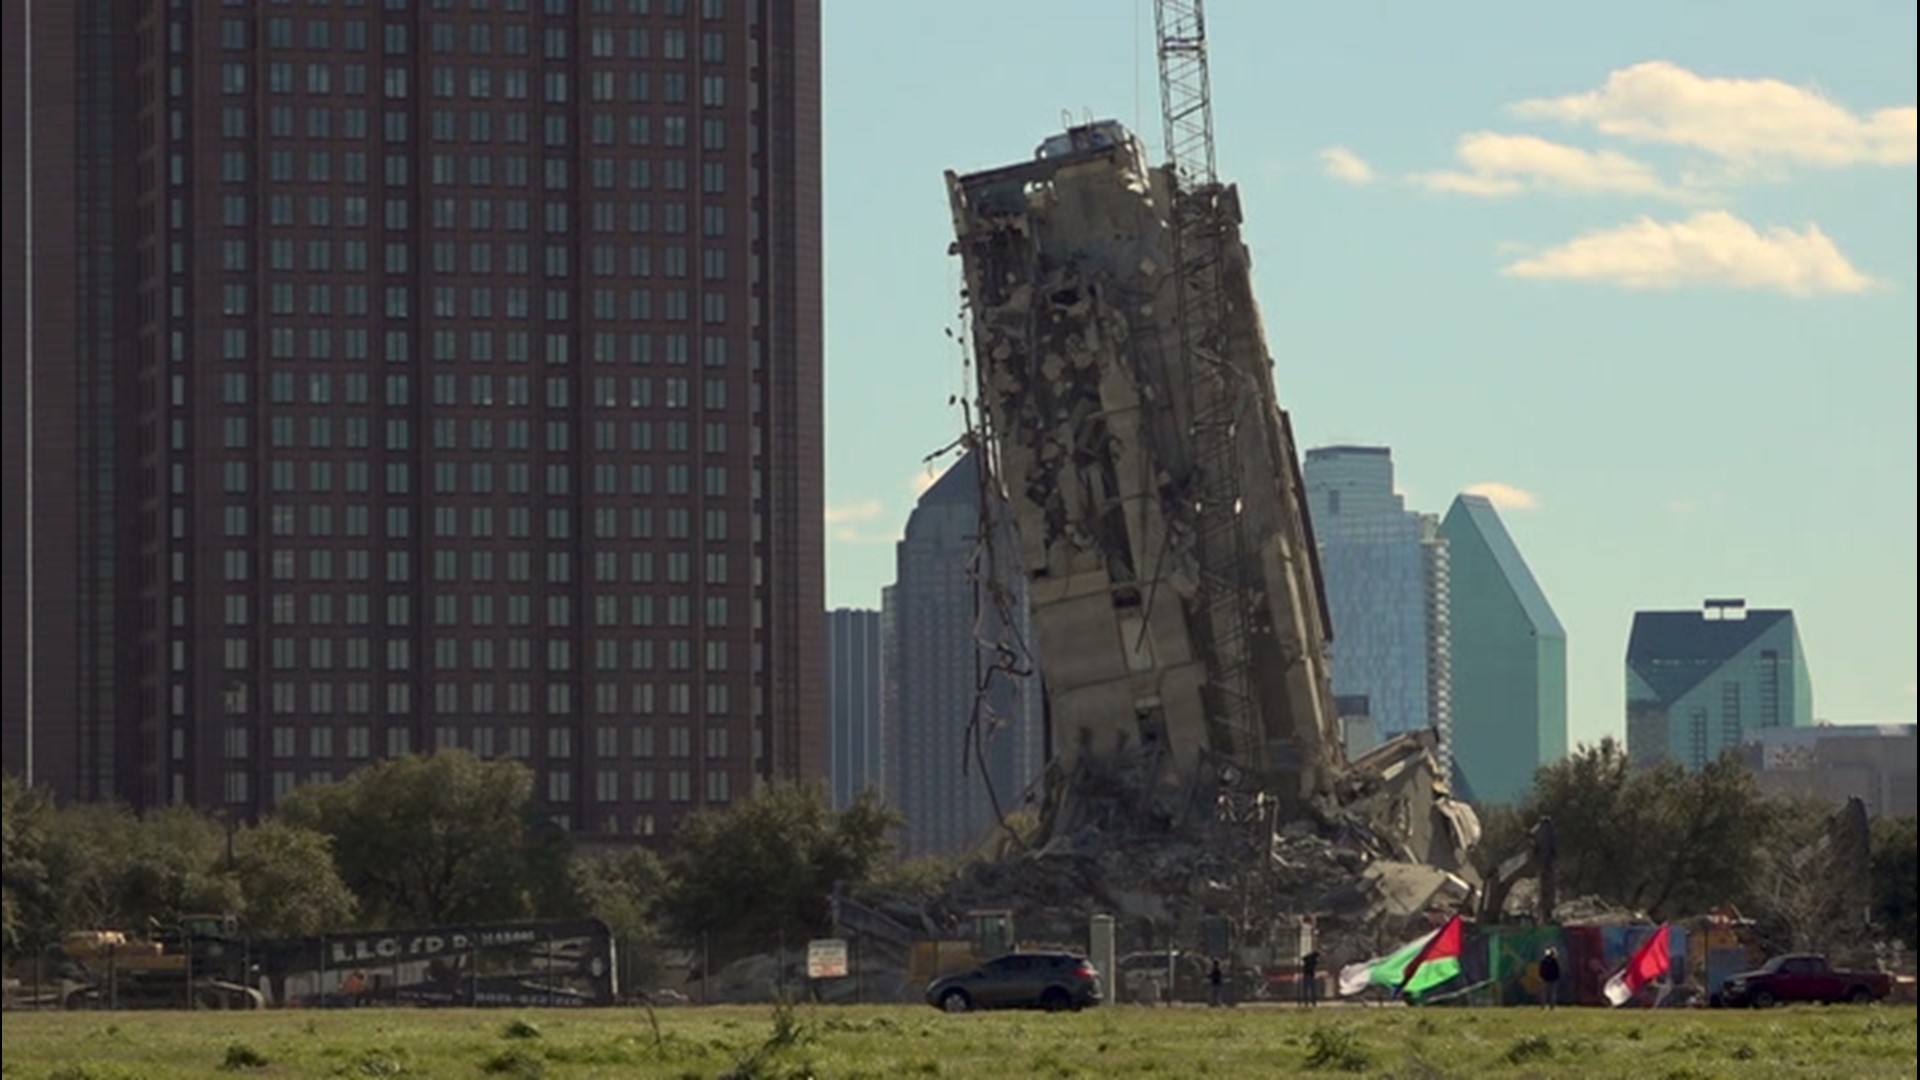 Texans braved the wind to check out the latest attraction in the DFW Metroplex, a failed building implosion now nicknamed the 'Leaning Tower of Dallas'.